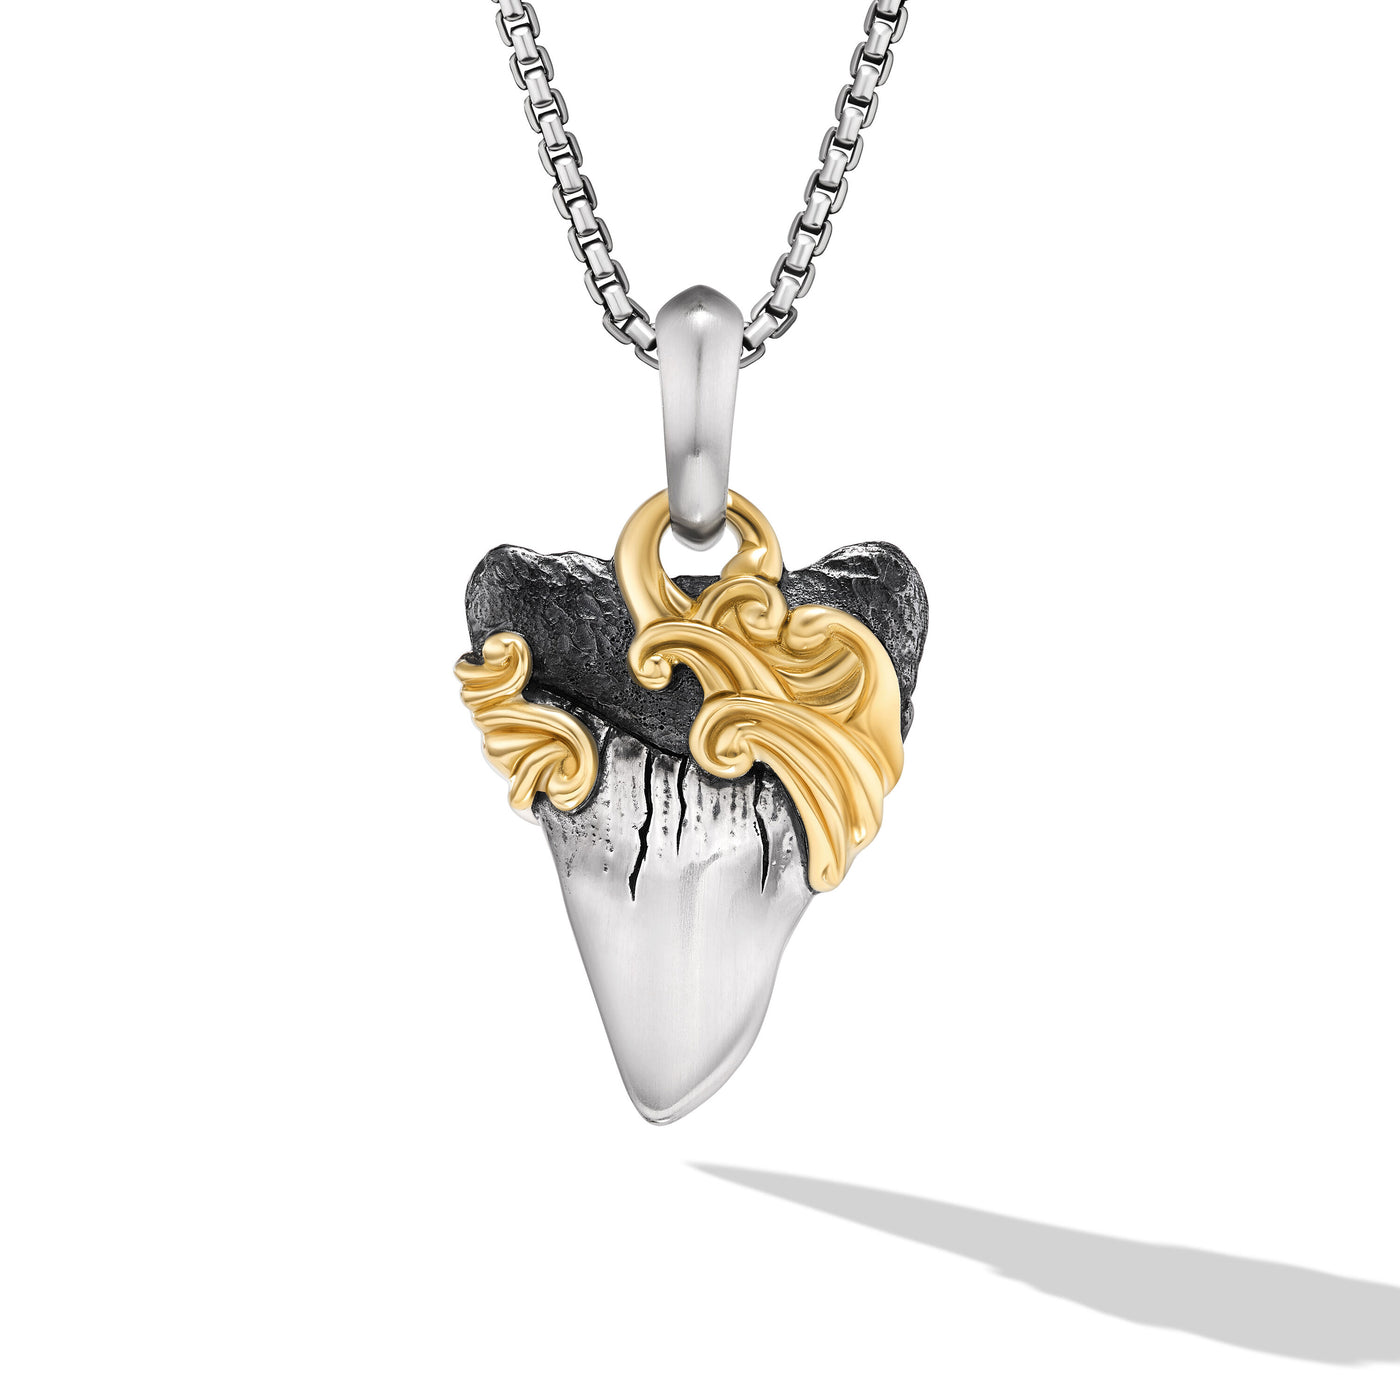 Waves Shark Tooth Amulet in Sterling Silver with 18K Yellow Gold\, 25mm